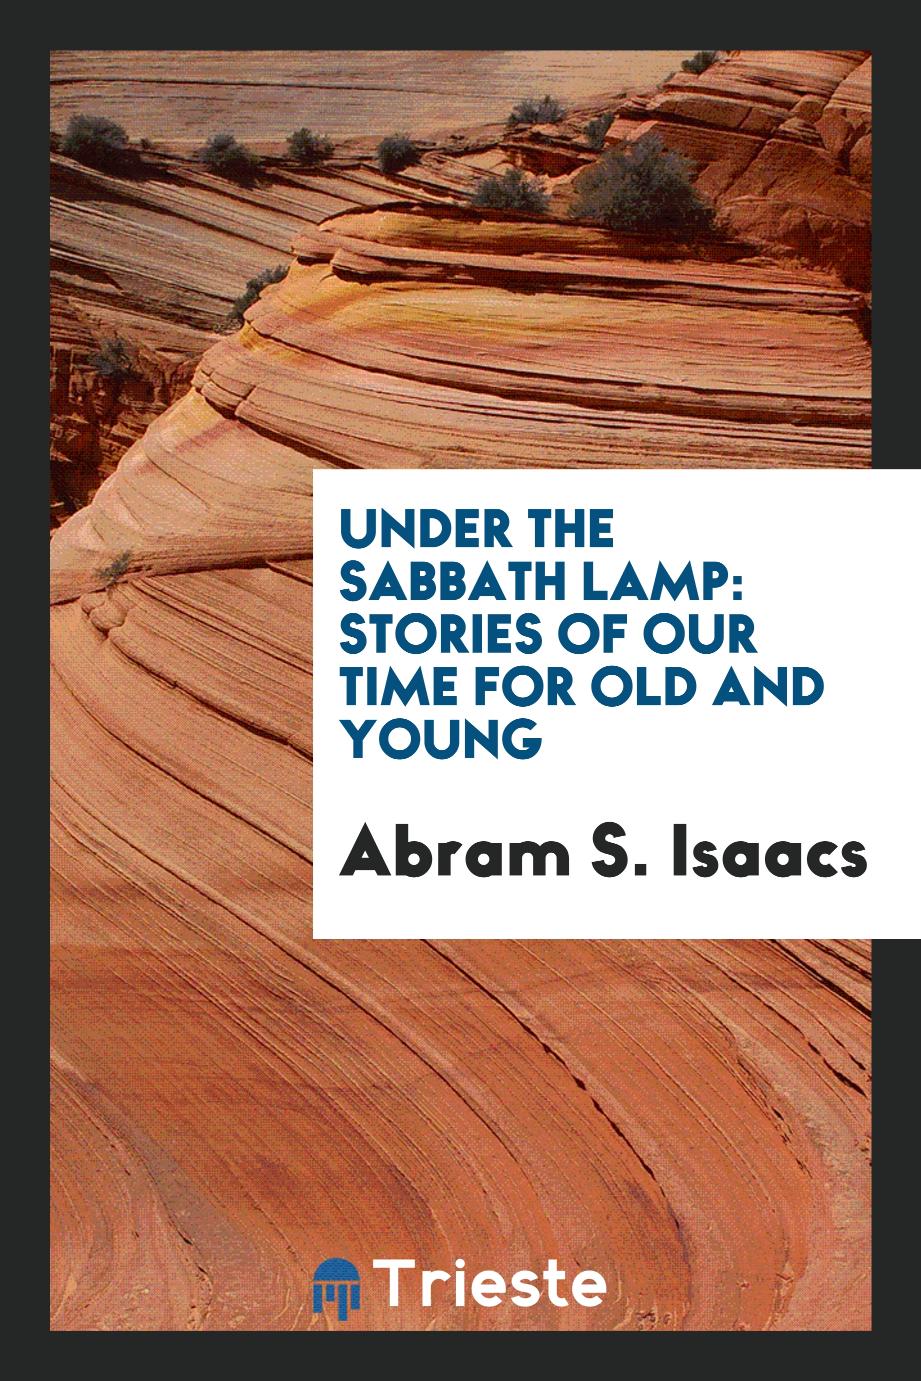 Under the Sabbath lamp: stories of our time for old and young